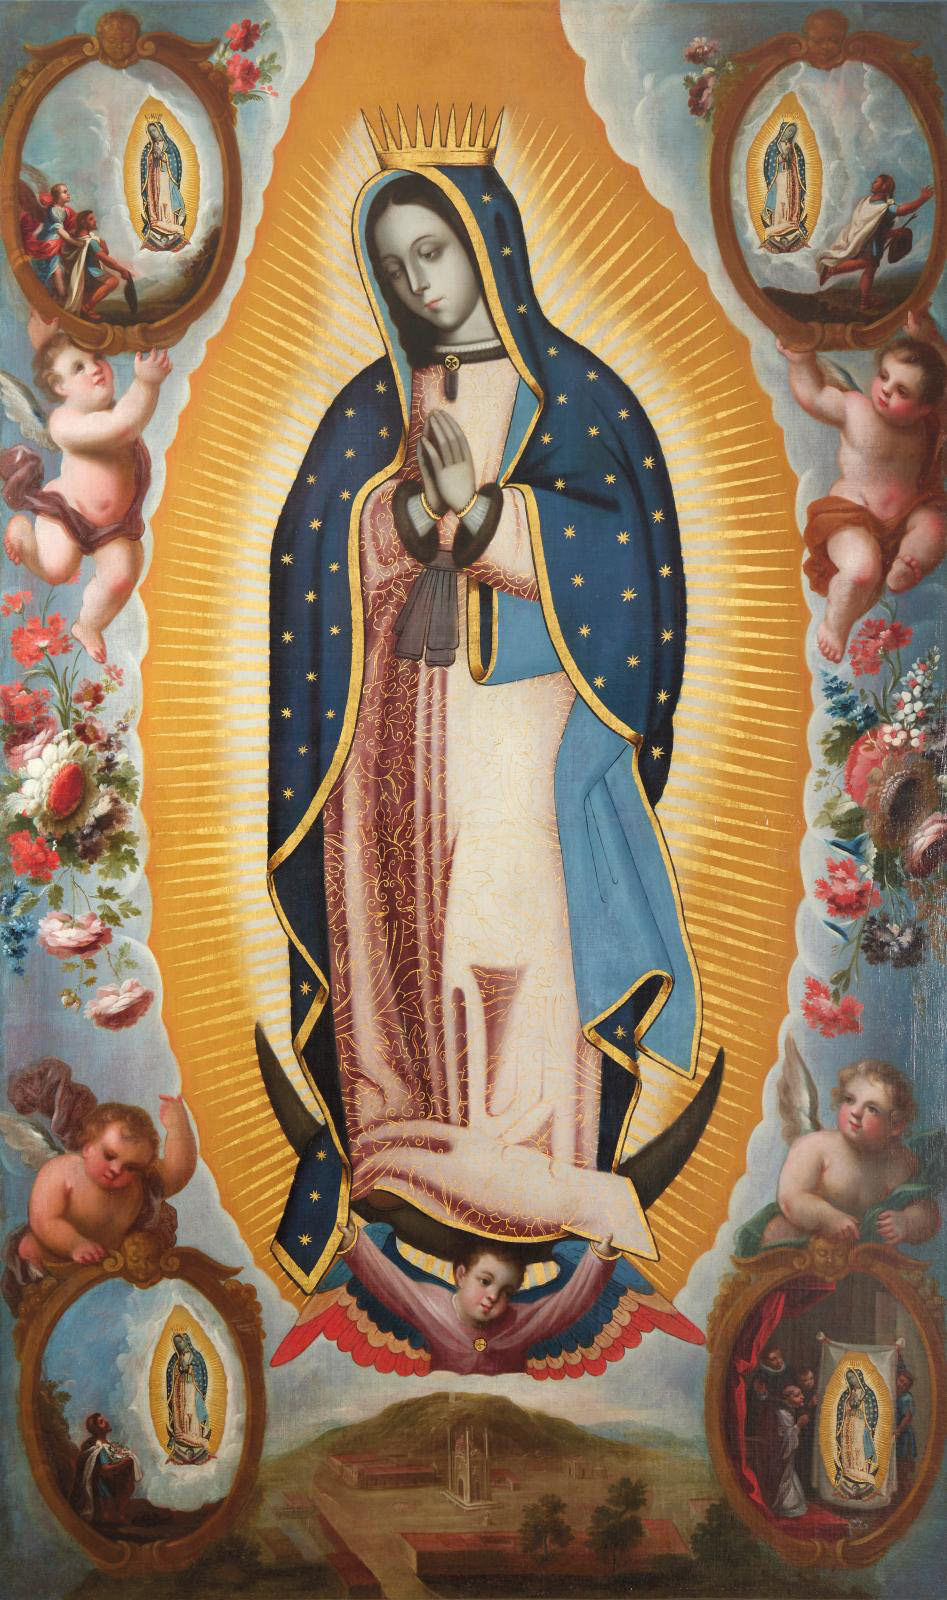 Our Lady of Guadalupe: Reigns as Queen of Mexico